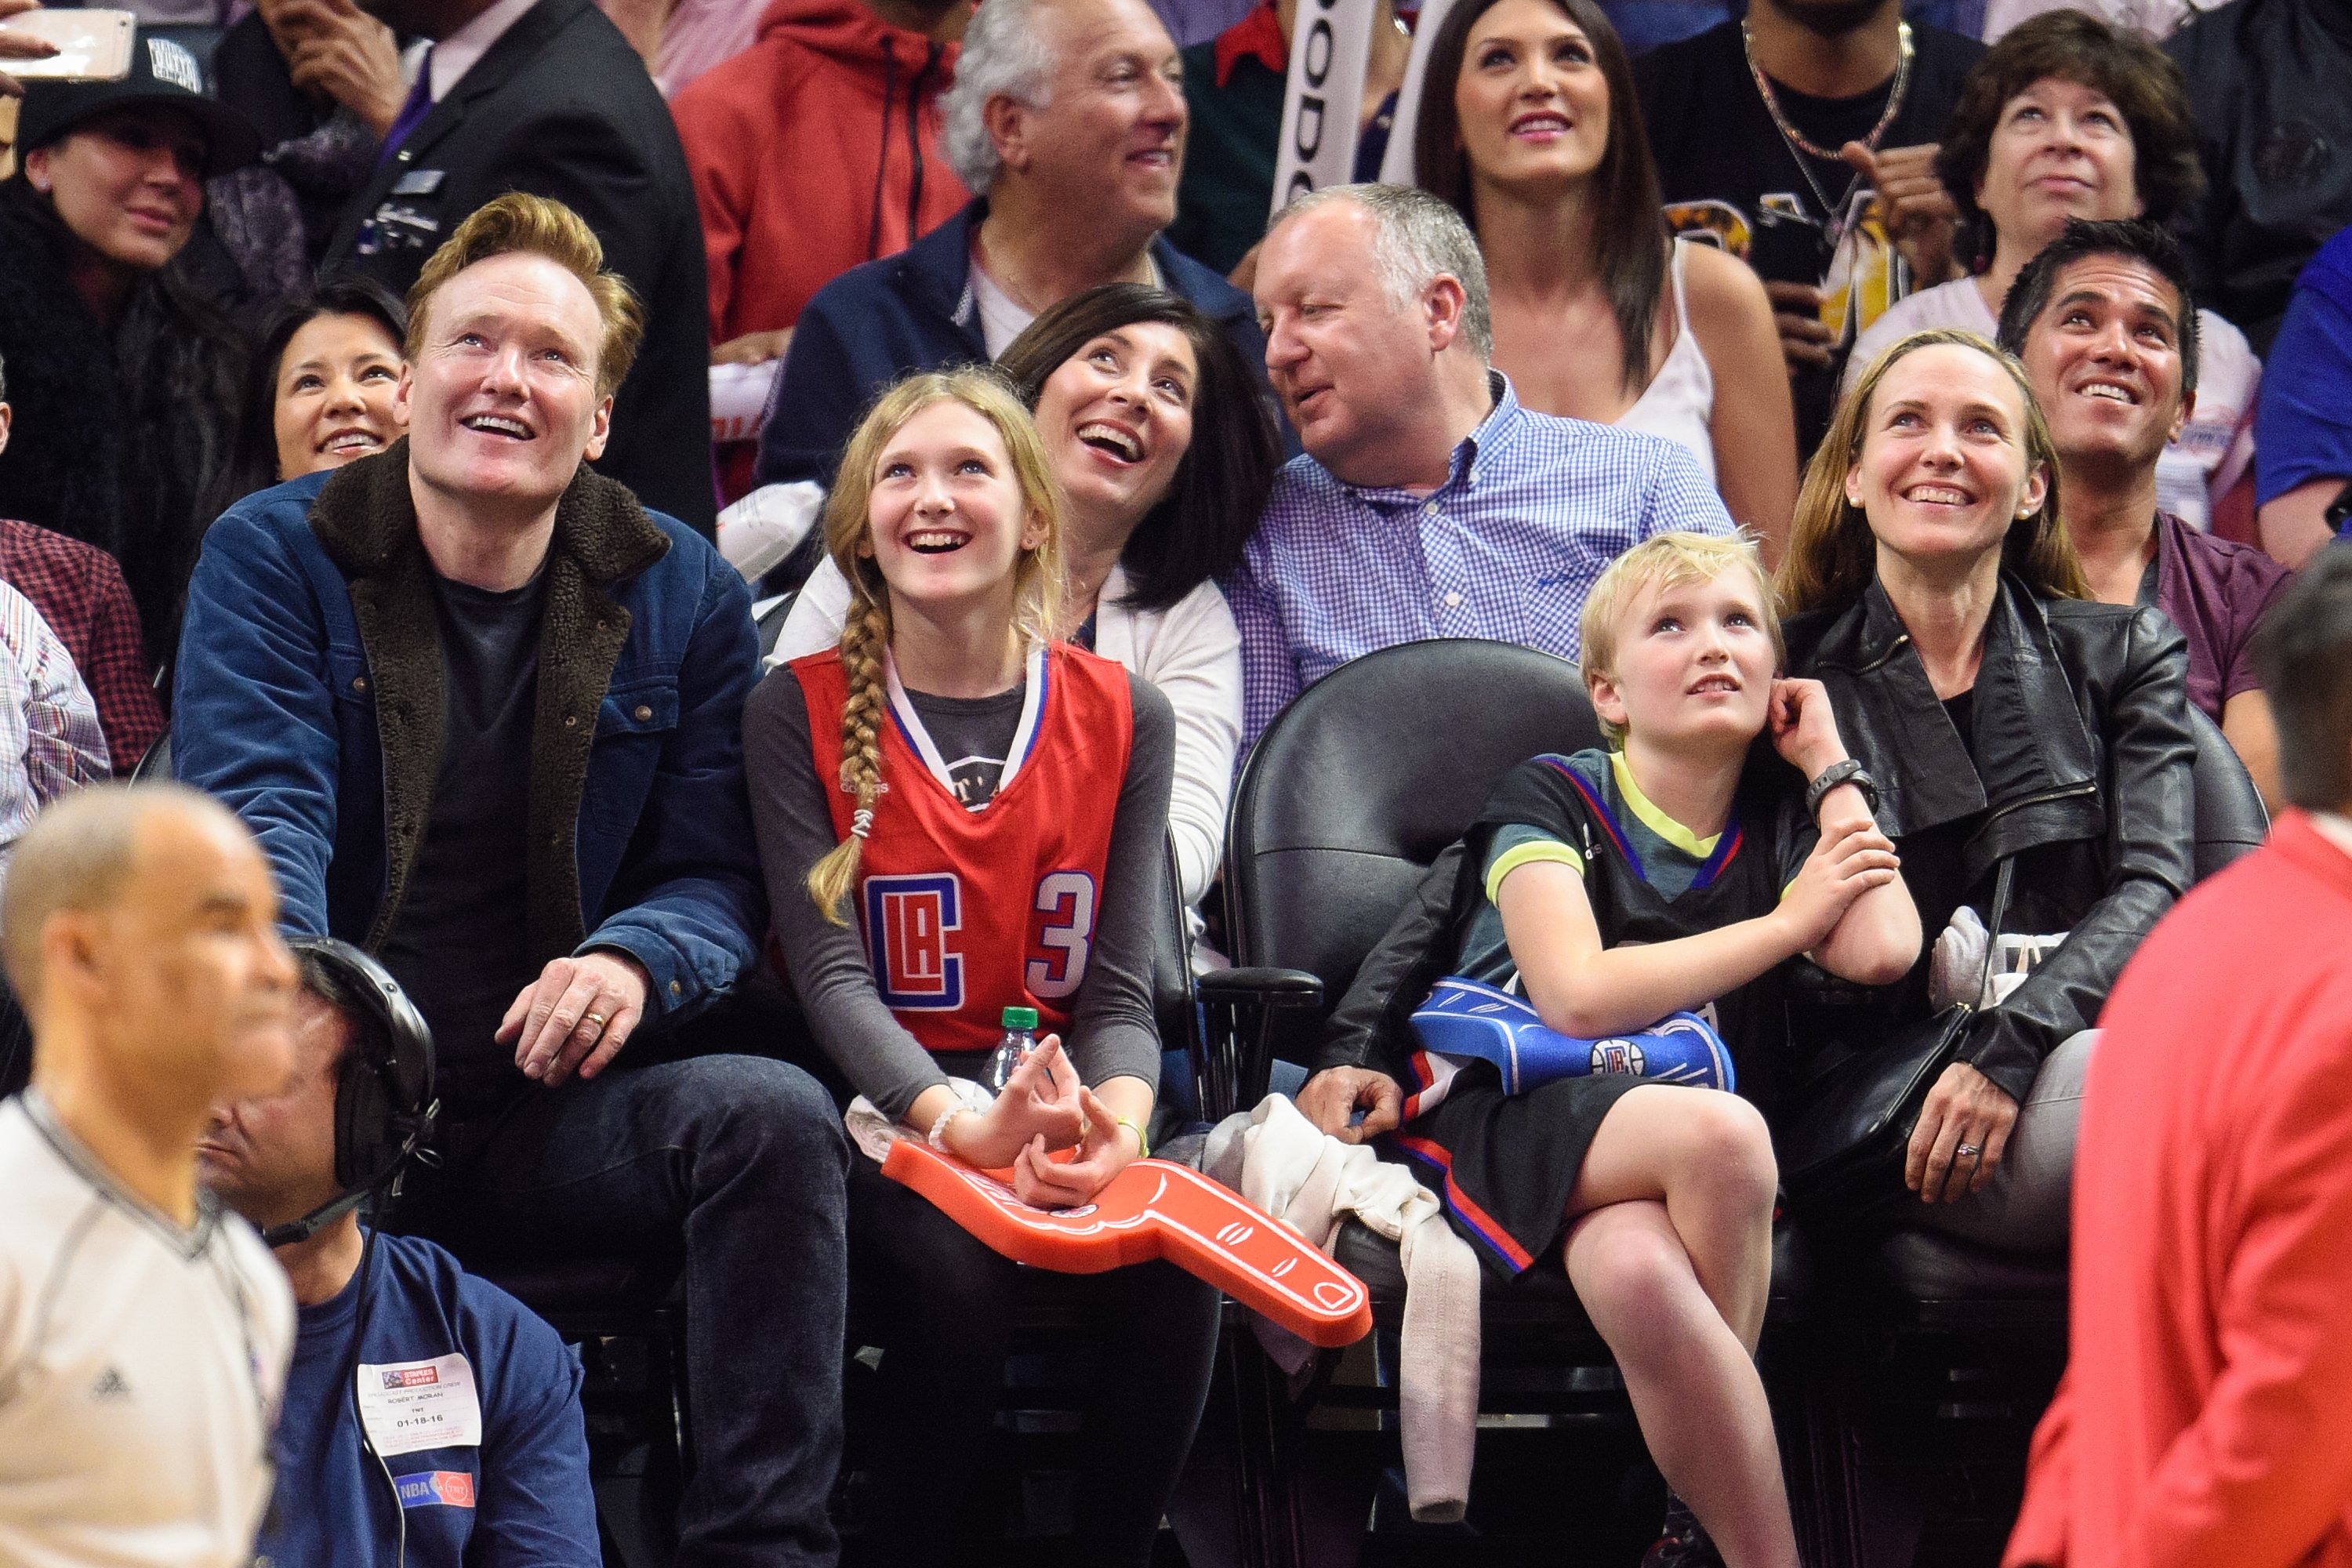 Conan O'Brien, daughter Neve, son Beckett, and wife Liza Powel O'Brien attend a basketball game between the Houston Rockets and the Los Angeles Clippers at Staples Center on January 18, 2016, in Los Angeles, California. | Source: Getty Images